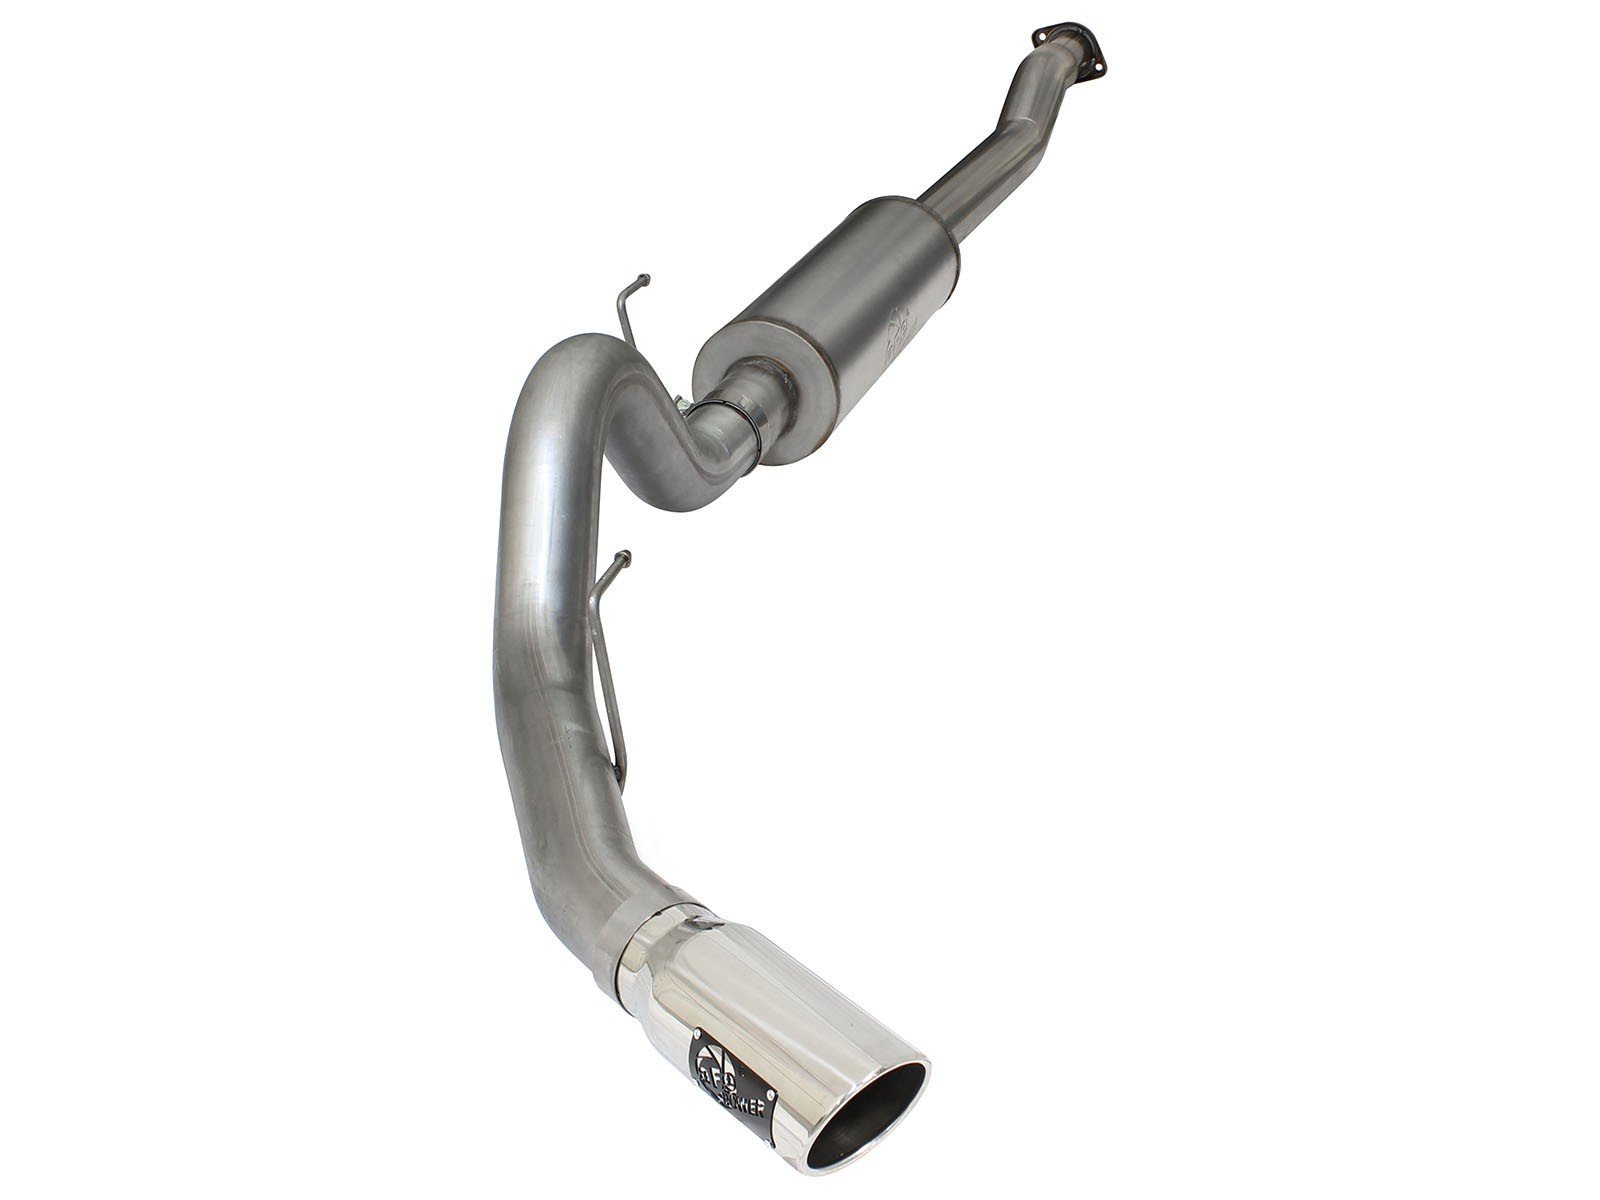 11-14 Ford F150 ATLAS Series 4" 409 Stainless Steel Cat Back Exhaust System AFE Power V6-3.5L EcoBoost w/polished Exhaust Tip display